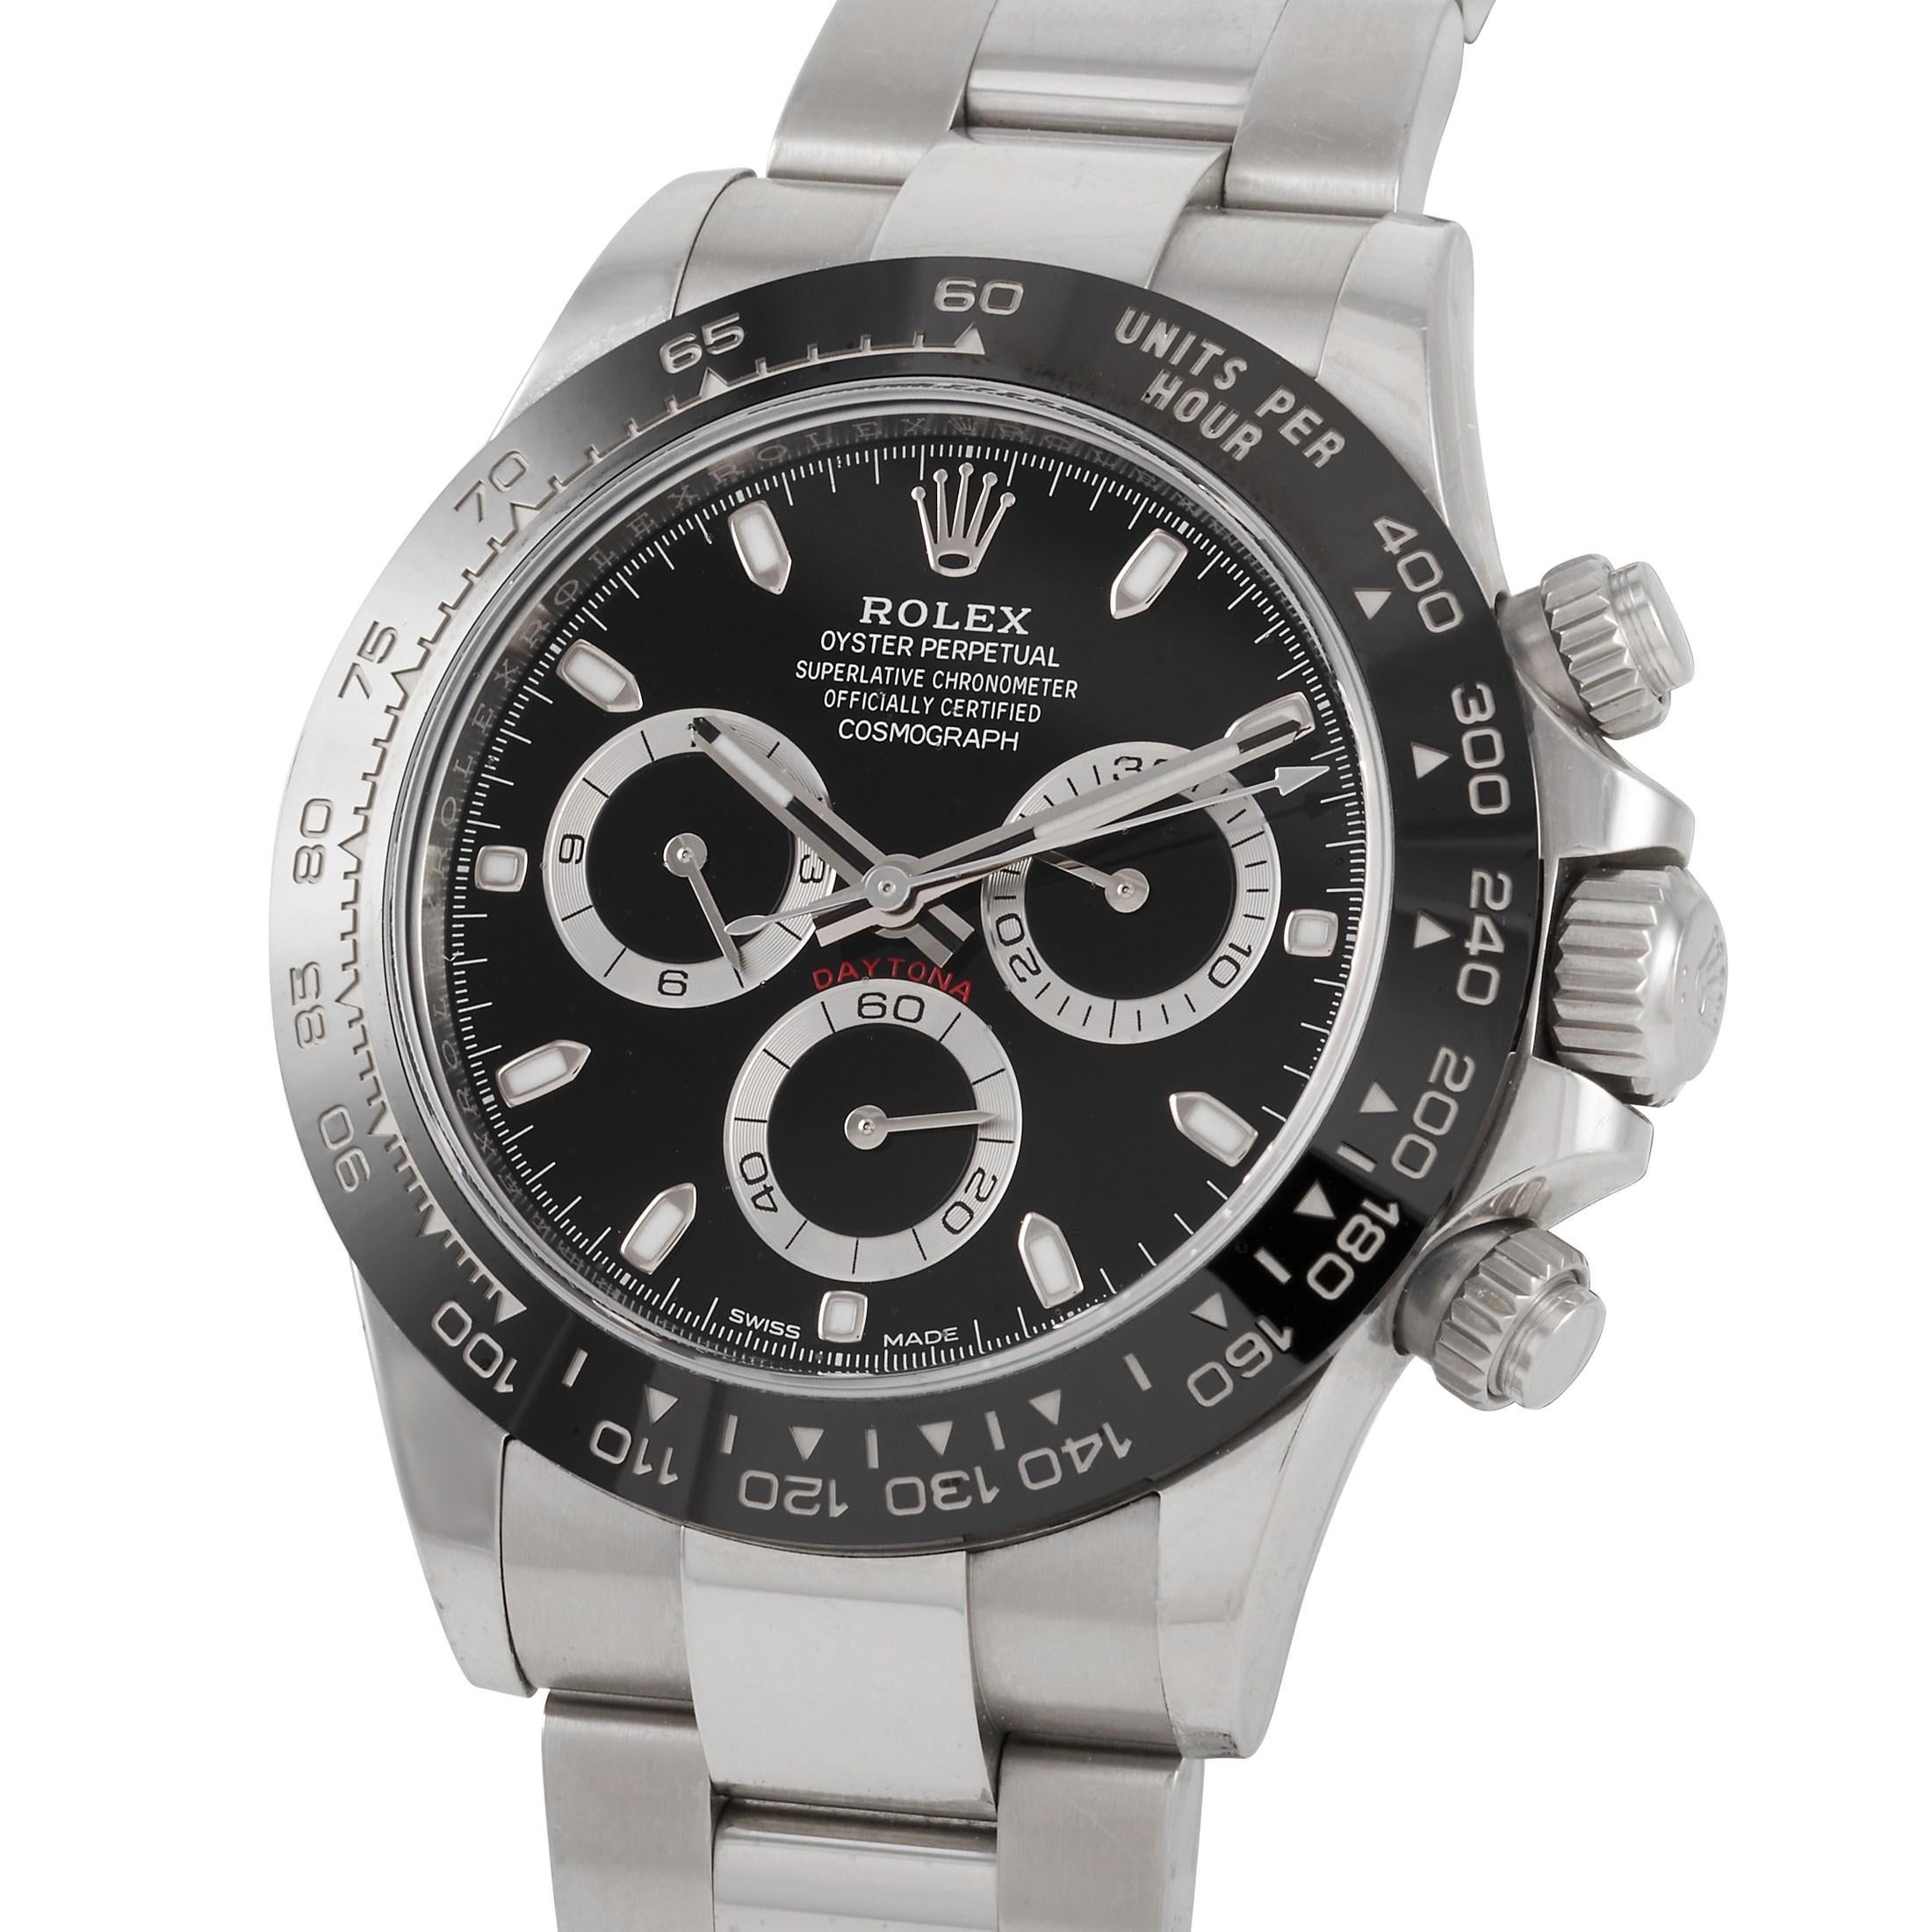 The Rolex Cosmograph Daytona, reference number 116500LN, is a member of the iconic “Cosmograph Daytona” collection.

The watch comes with a 40 mm Oyster case made of Oystersteel that features screw-down crown and Triplock triple waterproofness